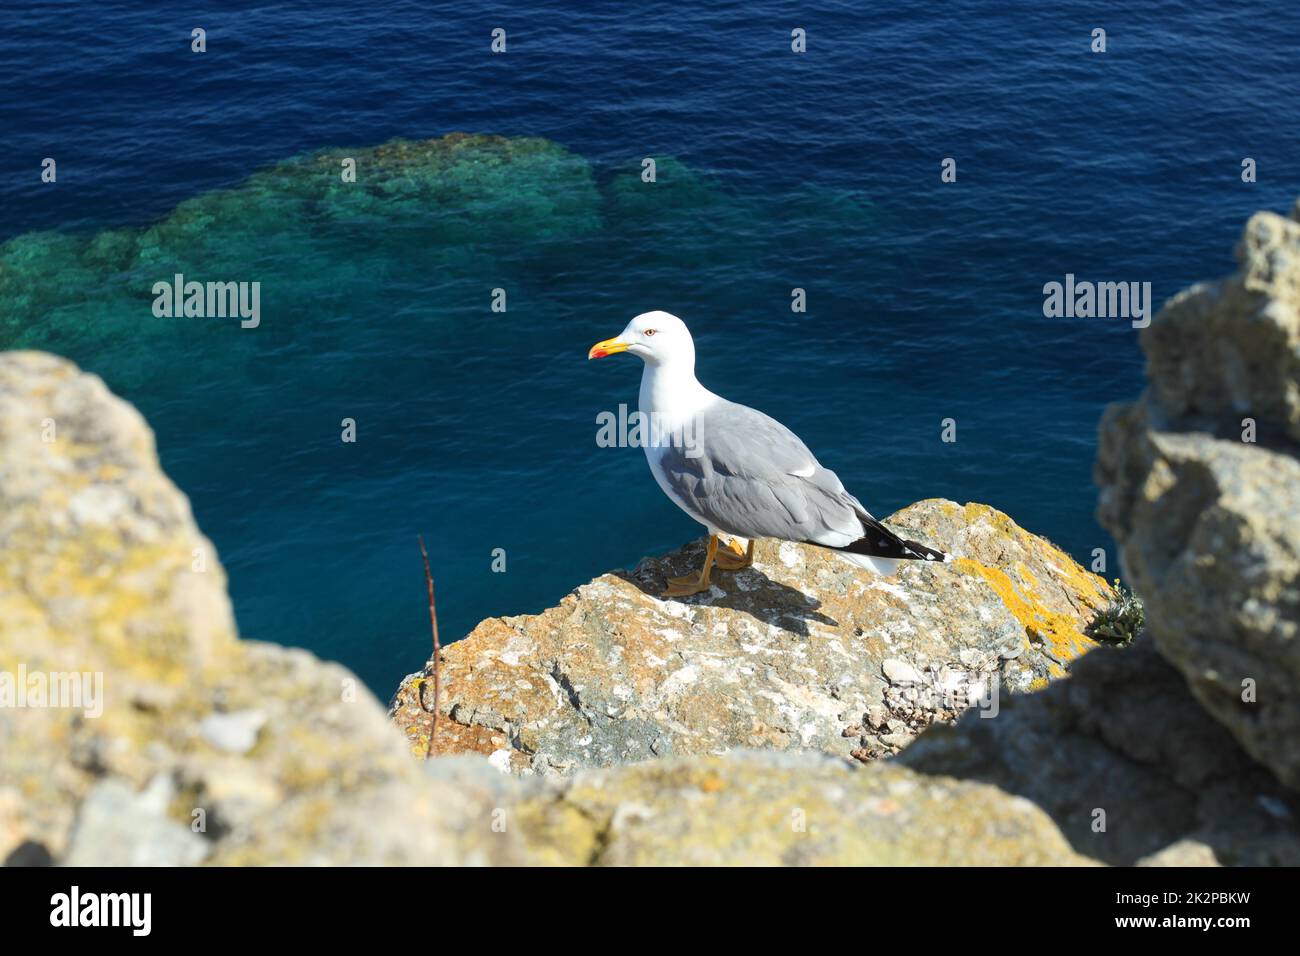 In the bright sun light, a seagull standing on rocks in front of beautiful turquoise blue sea Stock Photo